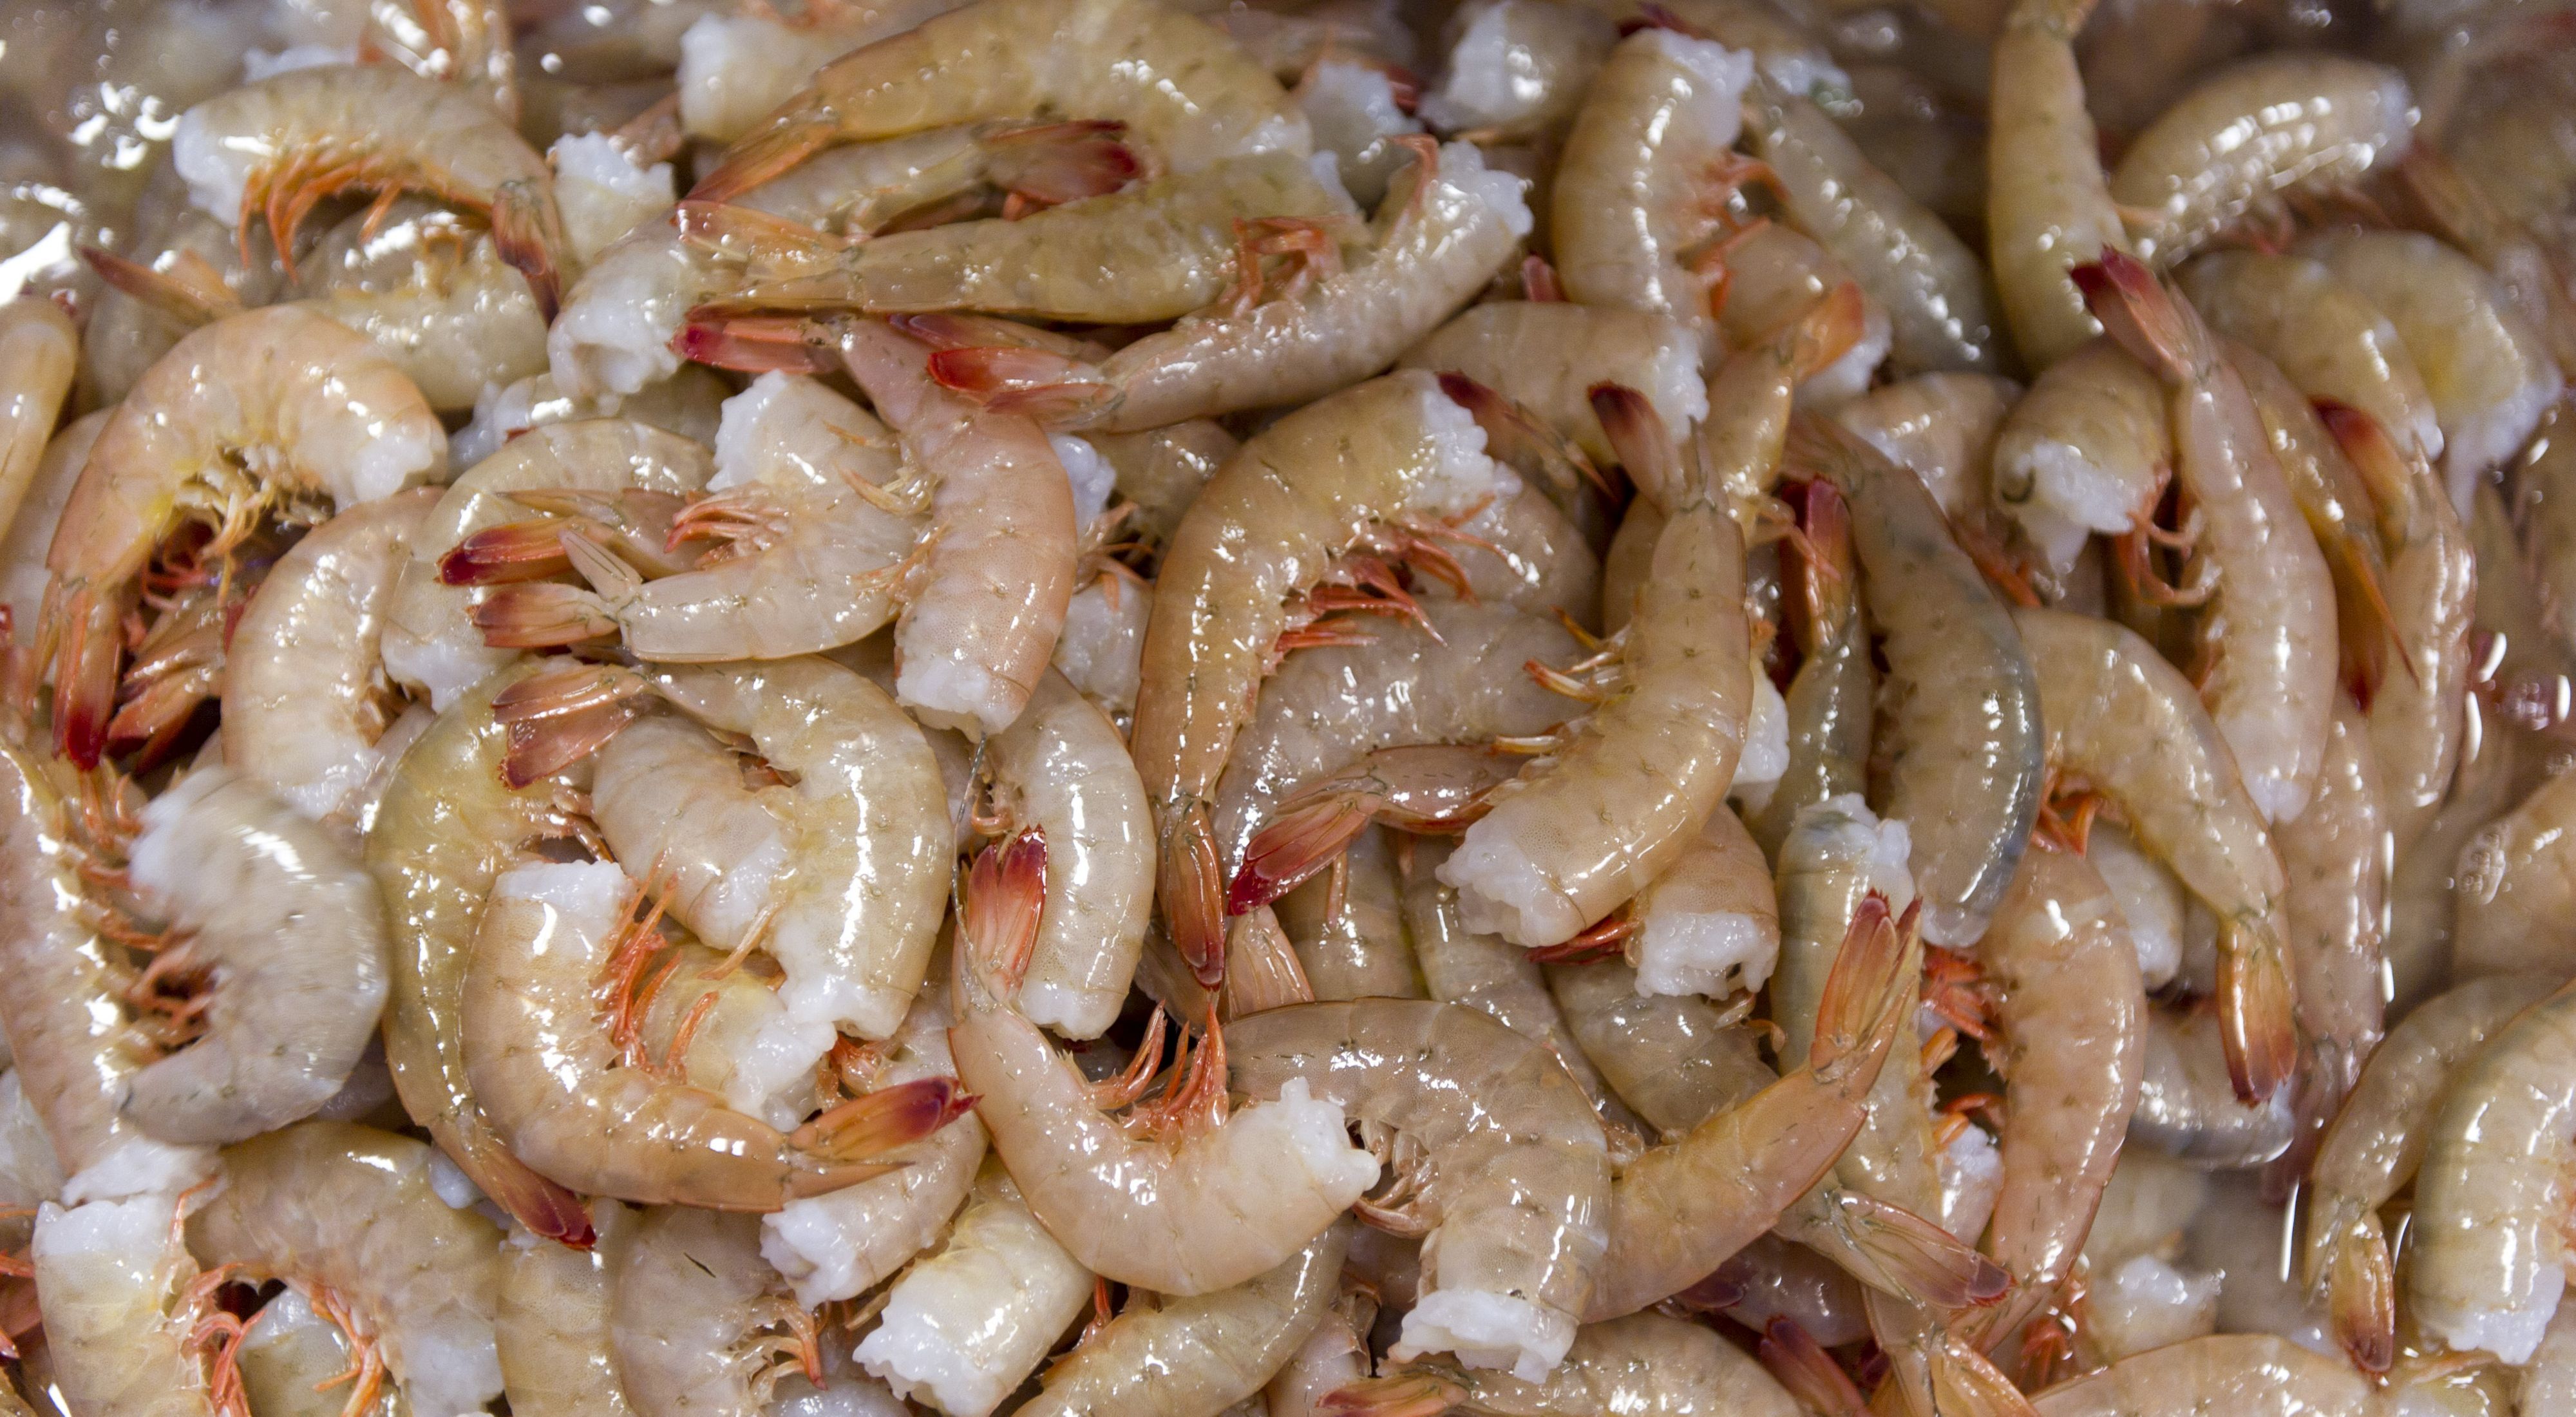 A pile of farmed shrimp awaits processing and packaging.